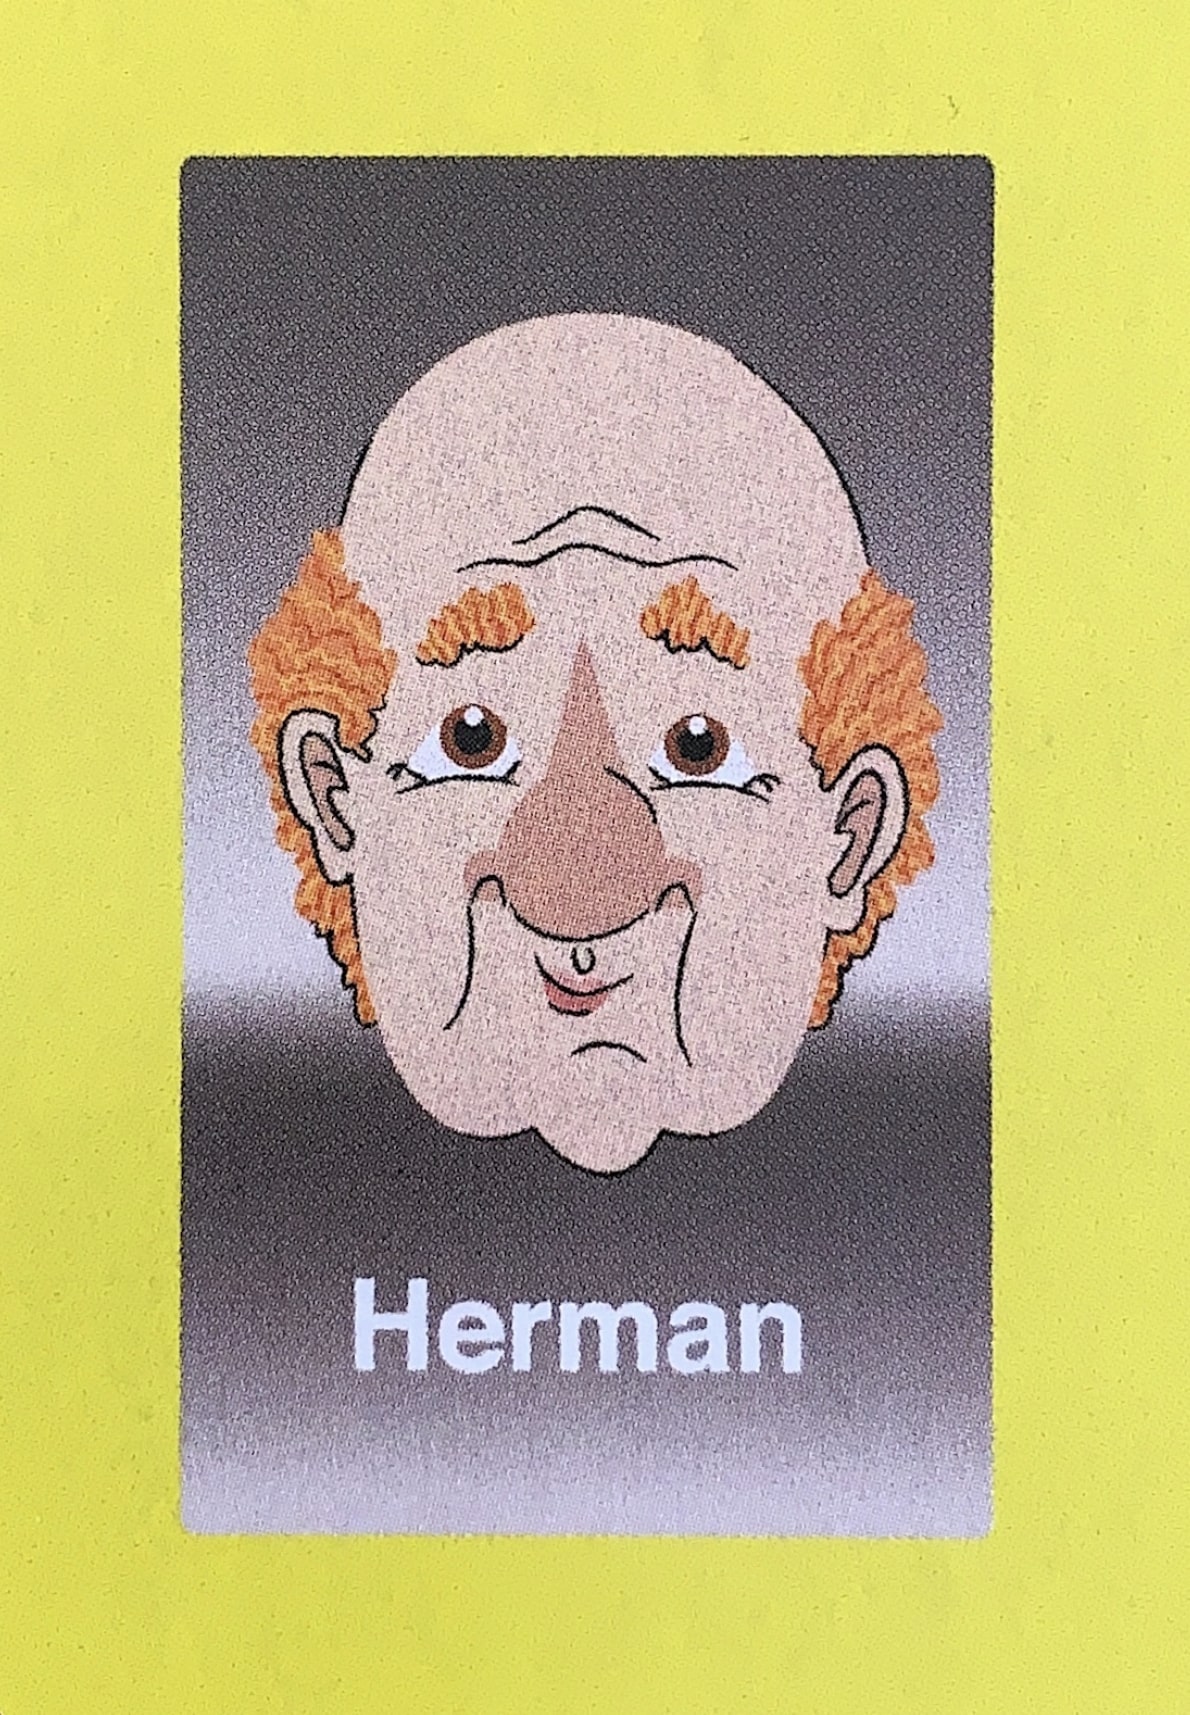  - Herman is the latest in a long line of proud plumbers. During a mid-life crisis he became disillusioned with snaking hairballs out of shower drains, and when buying a motorcycle didn’t make him feel better, he spontaneously auditioned to become a Guess Who?® face. Chosen for his combination of bald head, flame orange hair, and bulbous nose, he was as surprised as the rest of us when he was chosen. The fortune and fame made Herman uncomfortable, and helped him to realize that what he loved most was plunging a plunger into a potty plugged with poop. He gave most of his Guess Who?® money away and went back to his life as the bathroom wizard he was born to be. 